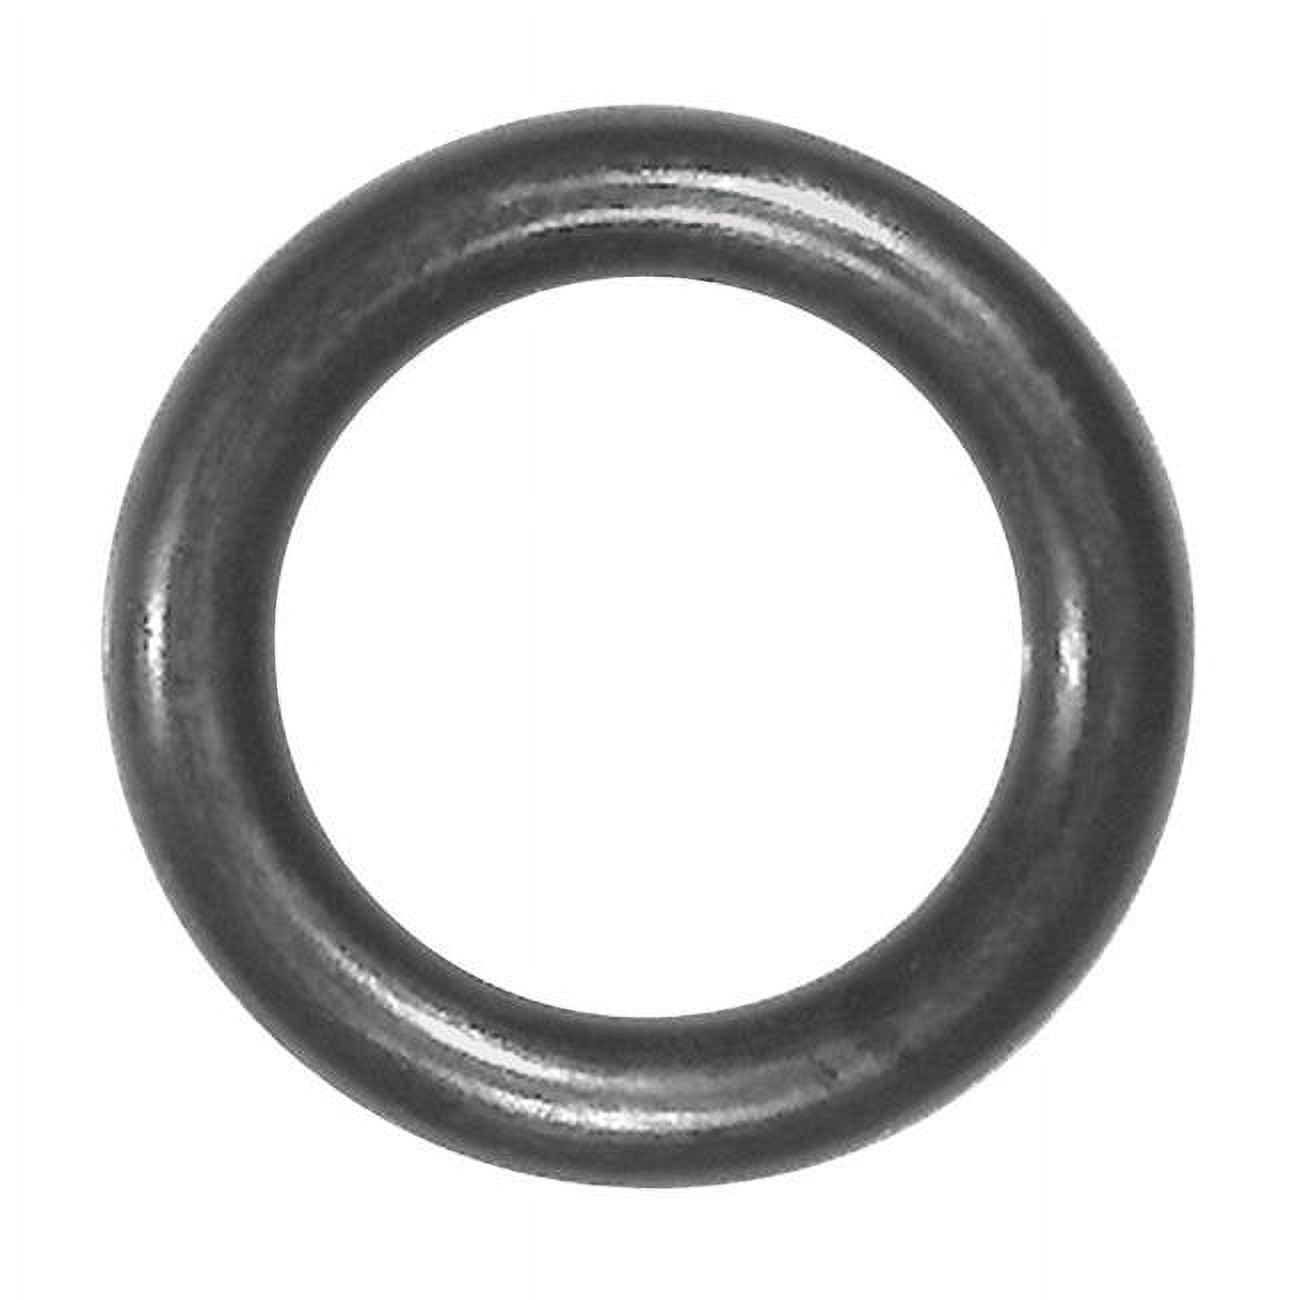 35873b 0.81 X 0.56 X 0.12 In. O-ring Faucet- Pack Of 5